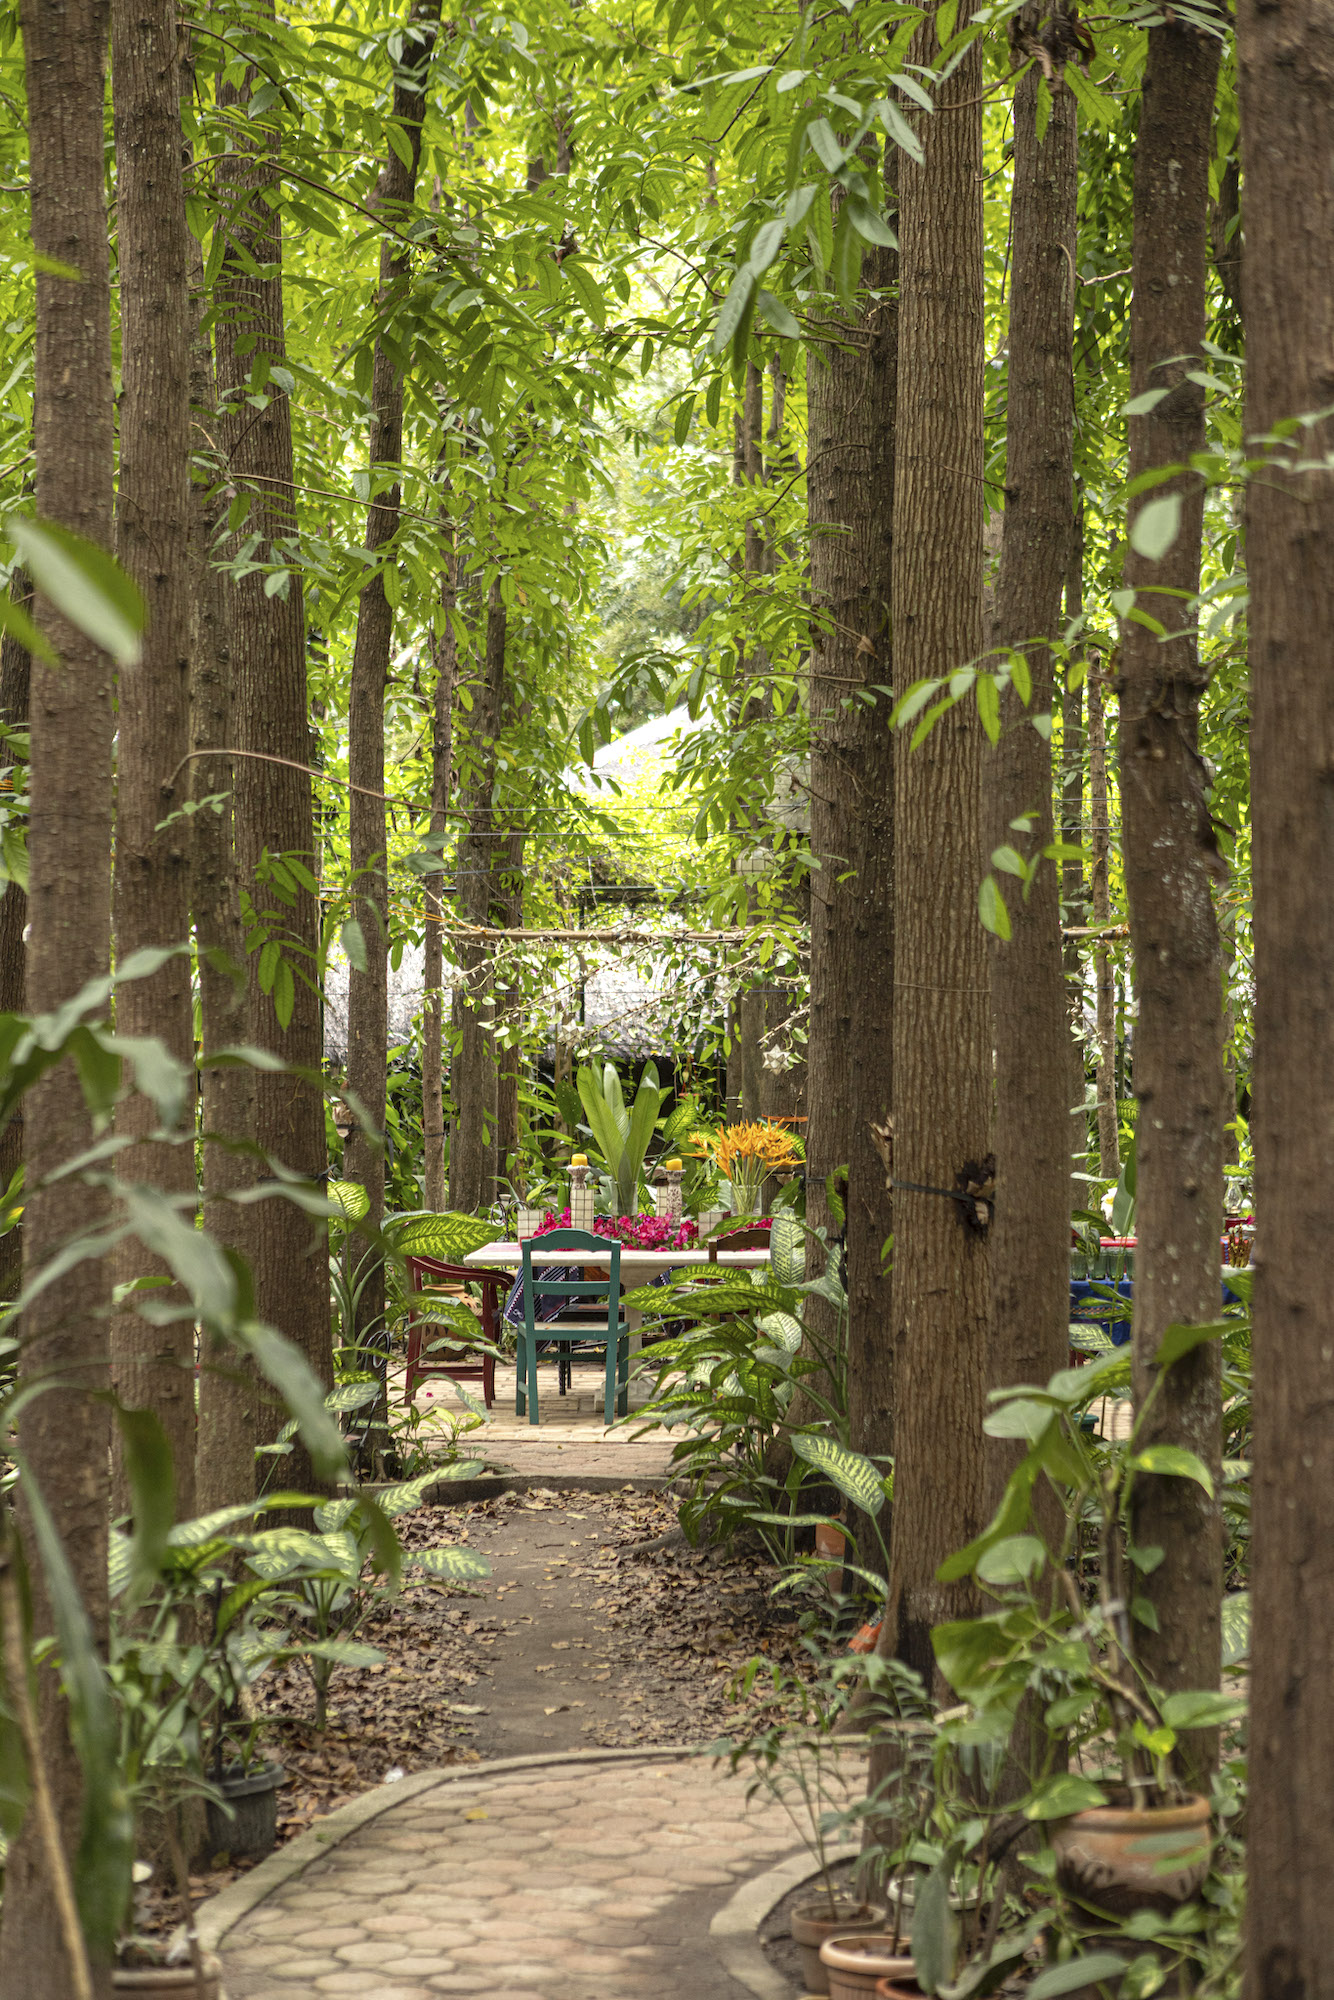 The path leading to the clearing in the center where the main Balé dining area is located